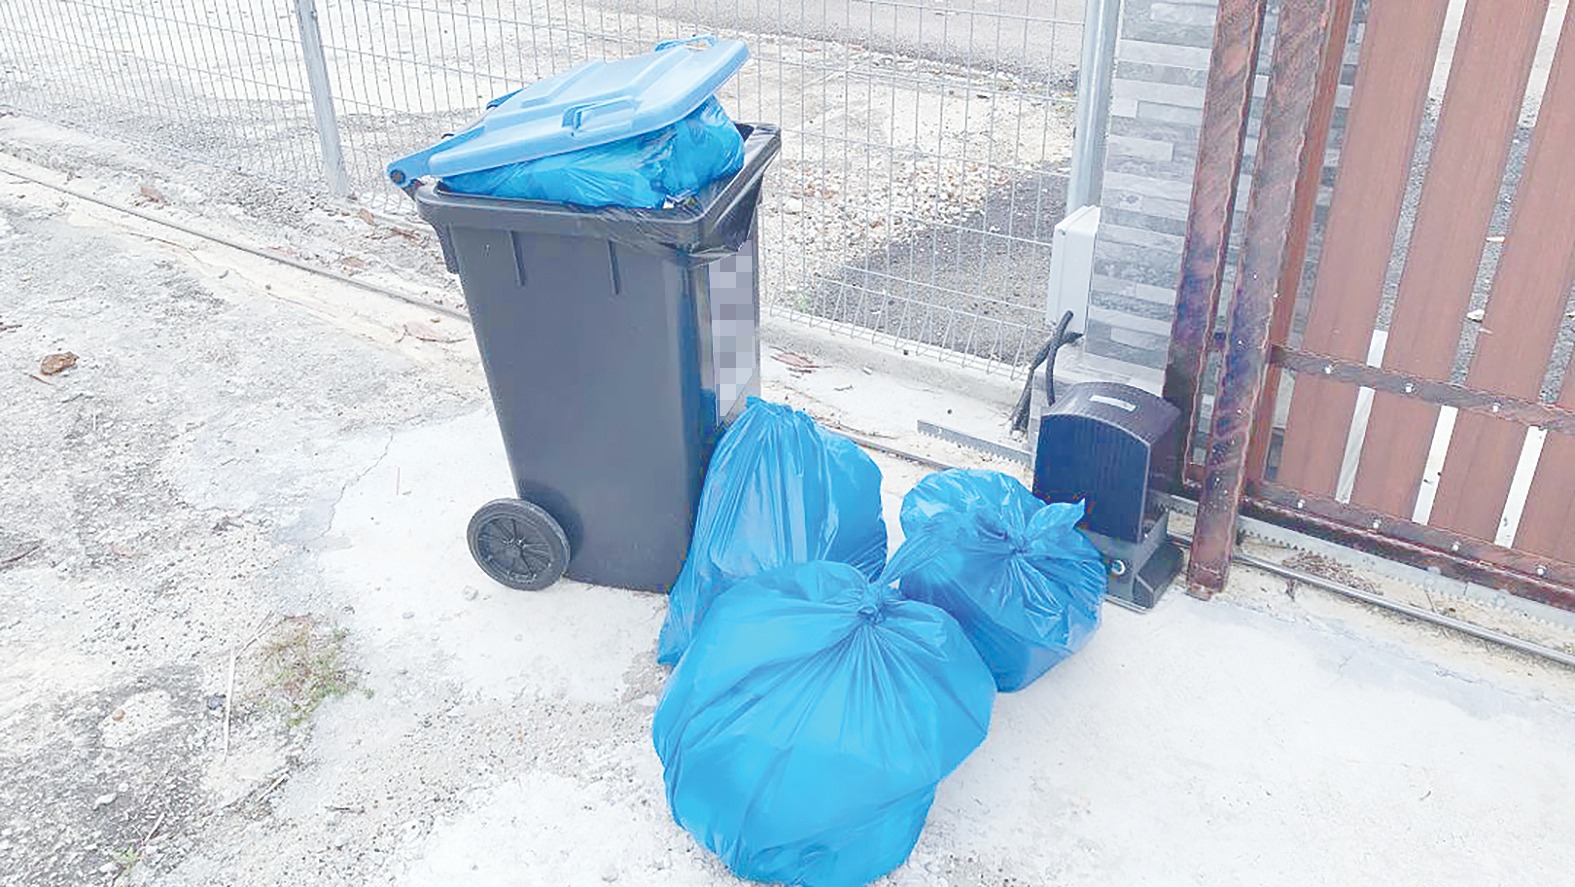 Johor residents forced to live with foul smell as trash is only collected once a month